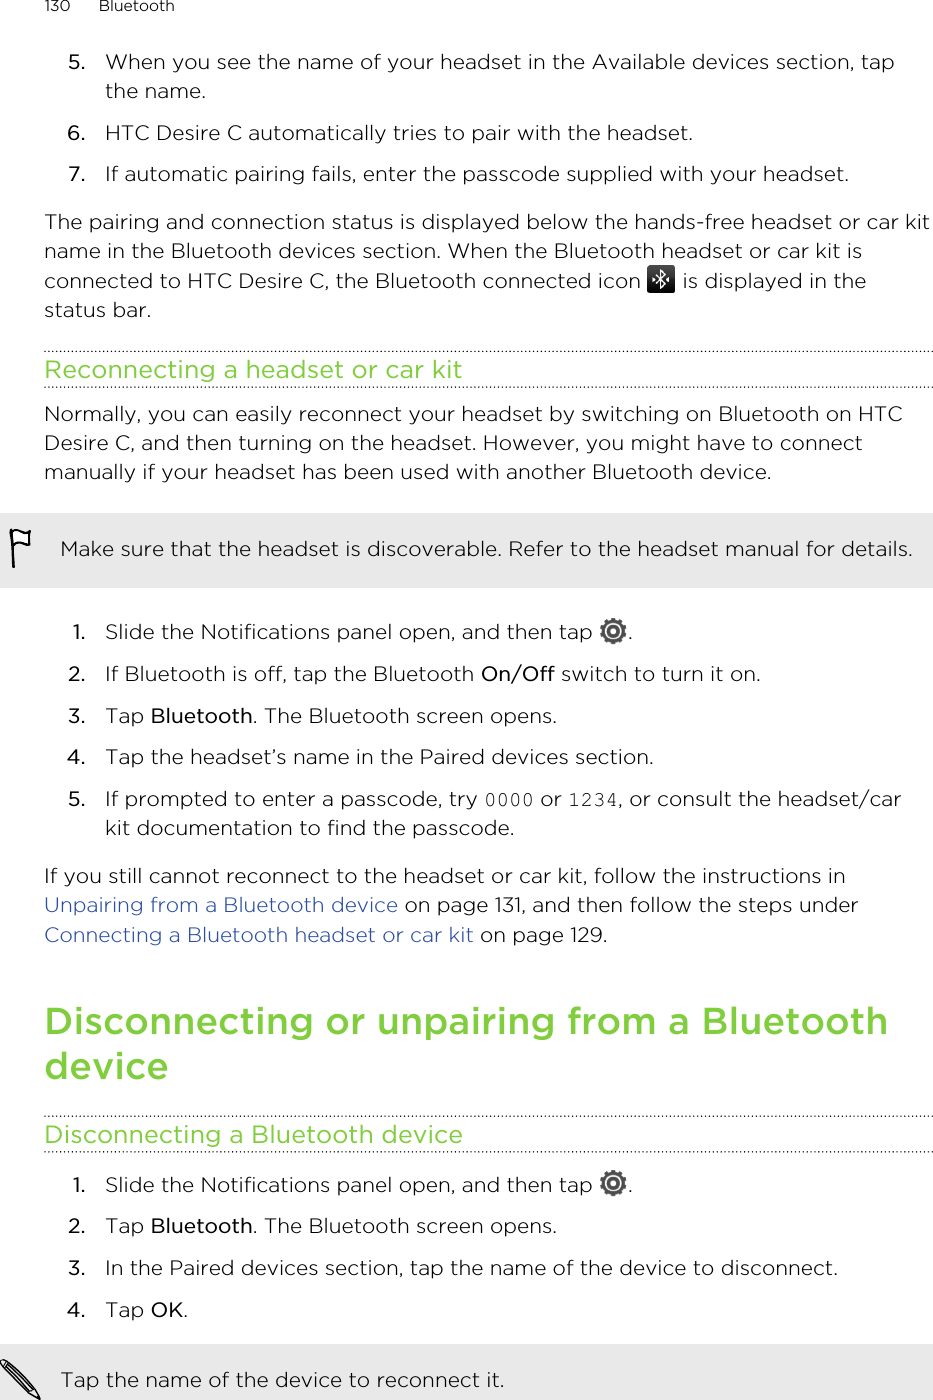 5. When you see the name of your headset in the Available devices section, tapthe name.6. HTC Desire C automatically tries to pair with the headset.7. If automatic pairing fails, enter the passcode supplied with your headset.The pairing and connection status is displayed below the hands-free headset or car kitname in the Bluetooth devices section. When the Bluetooth headset or car kit isconnected to HTC Desire C, the Bluetooth connected icon   is displayed in thestatus bar.Reconnecting a headset or car kitNormally, you can easily reconnect your headset by switching on Bluetooth on HTCDesire C, and then turning on the headset. However, you might have to connectmanually if your headset has been used with another Bluetooth device.Make sure that the headset is discoverable. Refer to the headset manual for details.1. Slide the Notifications panel open, and then tap  .2. If Bluetooth is off, tap the Bluetooth On/Off switch to turn it on.3. Tap Bluetooth. The Bluetooth screen opens.4. Tap the headset’s name in the Paired devices section.5. If prompted to enter a passcode, try 0000 or 1234, or consult the headset/carkit documentation to find the passcode.If you still cannot reconnect to the headset or car kit, follow the instructions in Unpairing from a Bluetooth device on page 131, and then follow the steps under Connecting a Bluetooth headset or car kit on page 129.Disconnecting or unpairing from a BluetoothdeviceDisconnecting a Bluetooth device1. Slide the Notifications panel open, and then tap  .2. Tap Bluetooth. The Bluetooth screen opens.3. In the Paired devices section, tap the name of the device to disconnect.4. Tap OK.Tap the name of the device to reconnect it.130 Bluetooth